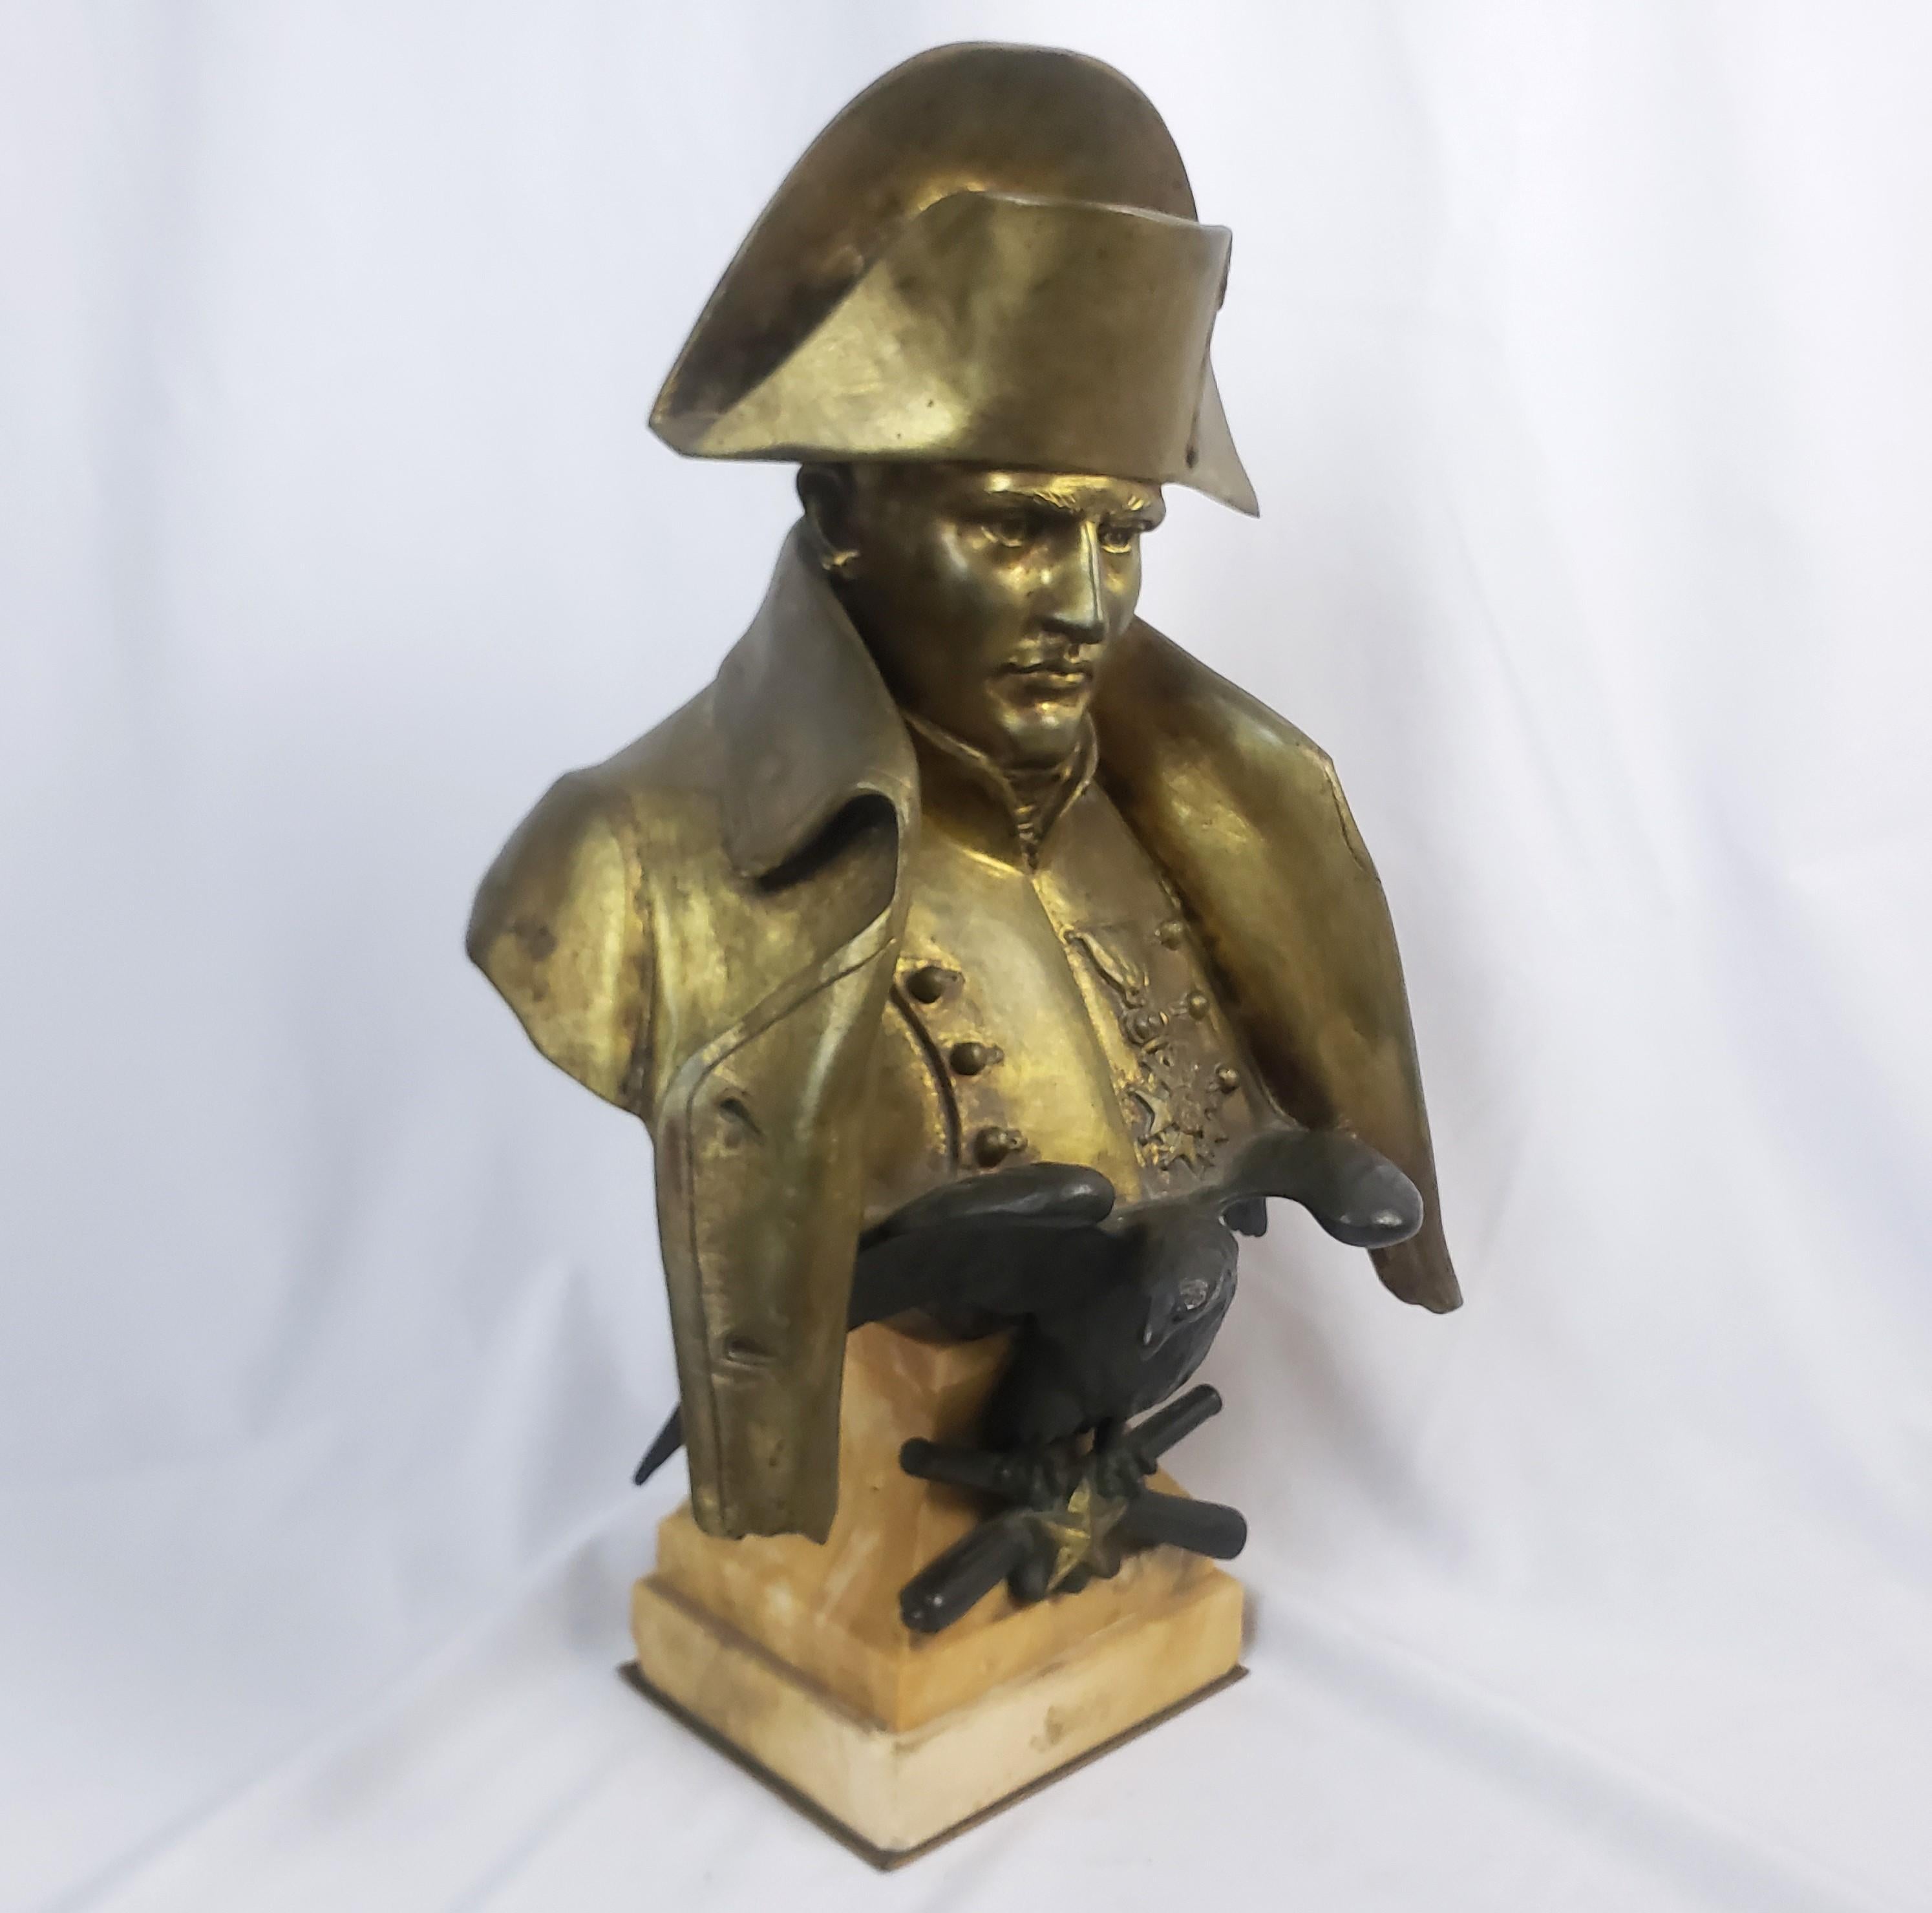 This antique well executed bronze bust was done by the well known Francesco La Monada of France in approximately 1900 in his signature style. The bust depicts a realistic study of Napoleon in uniform with an attached cast eagle and cross cannons on